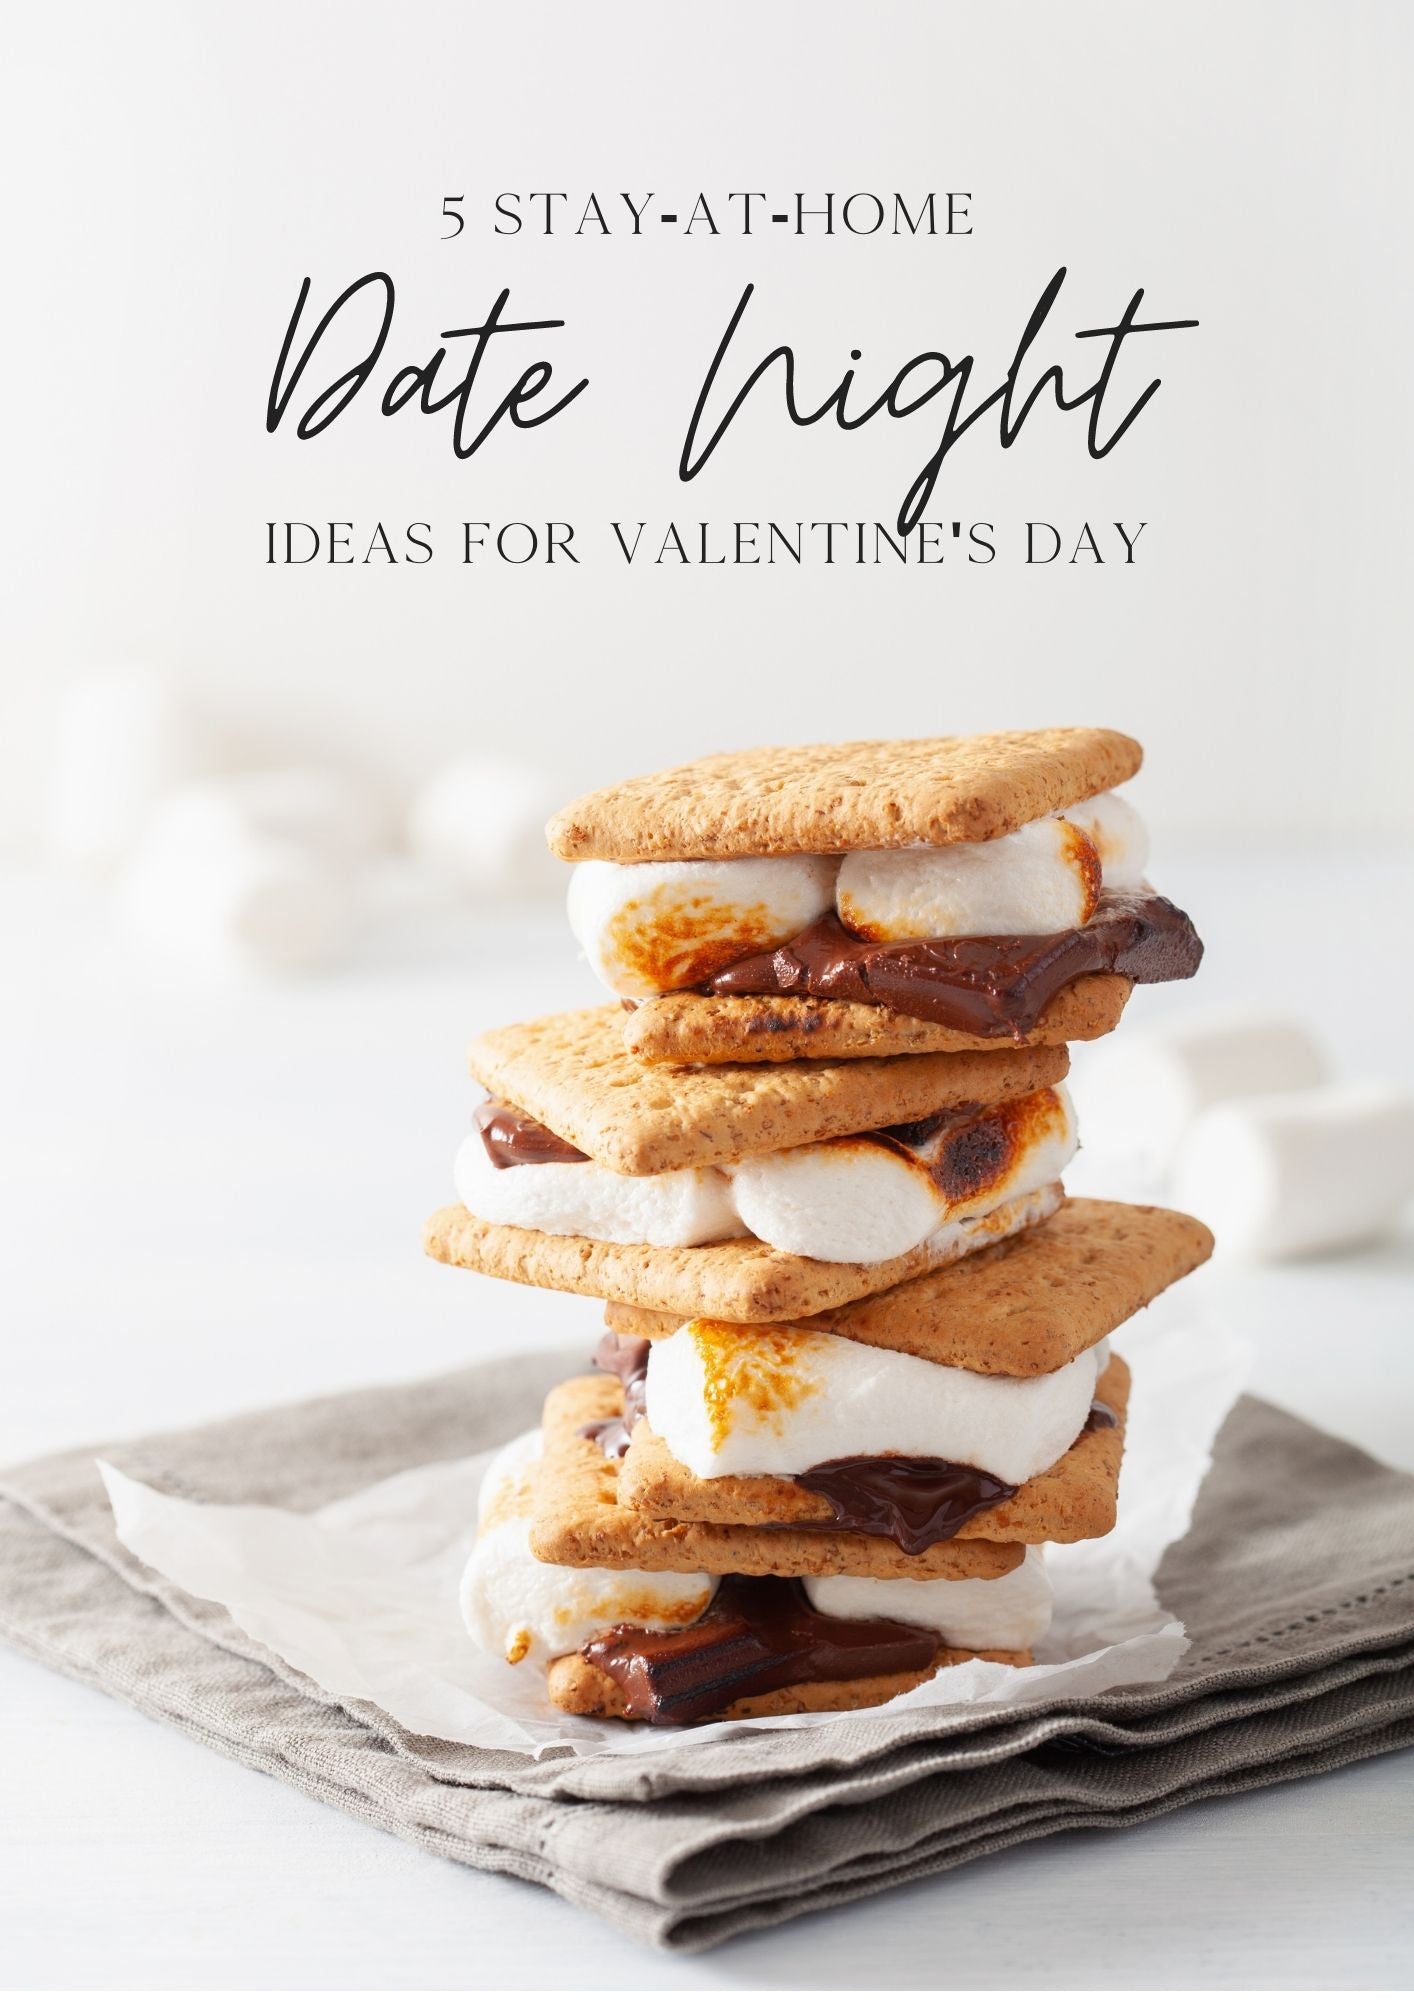 Five Stay-at-Home Date Night Ideas for Valentine's Day!